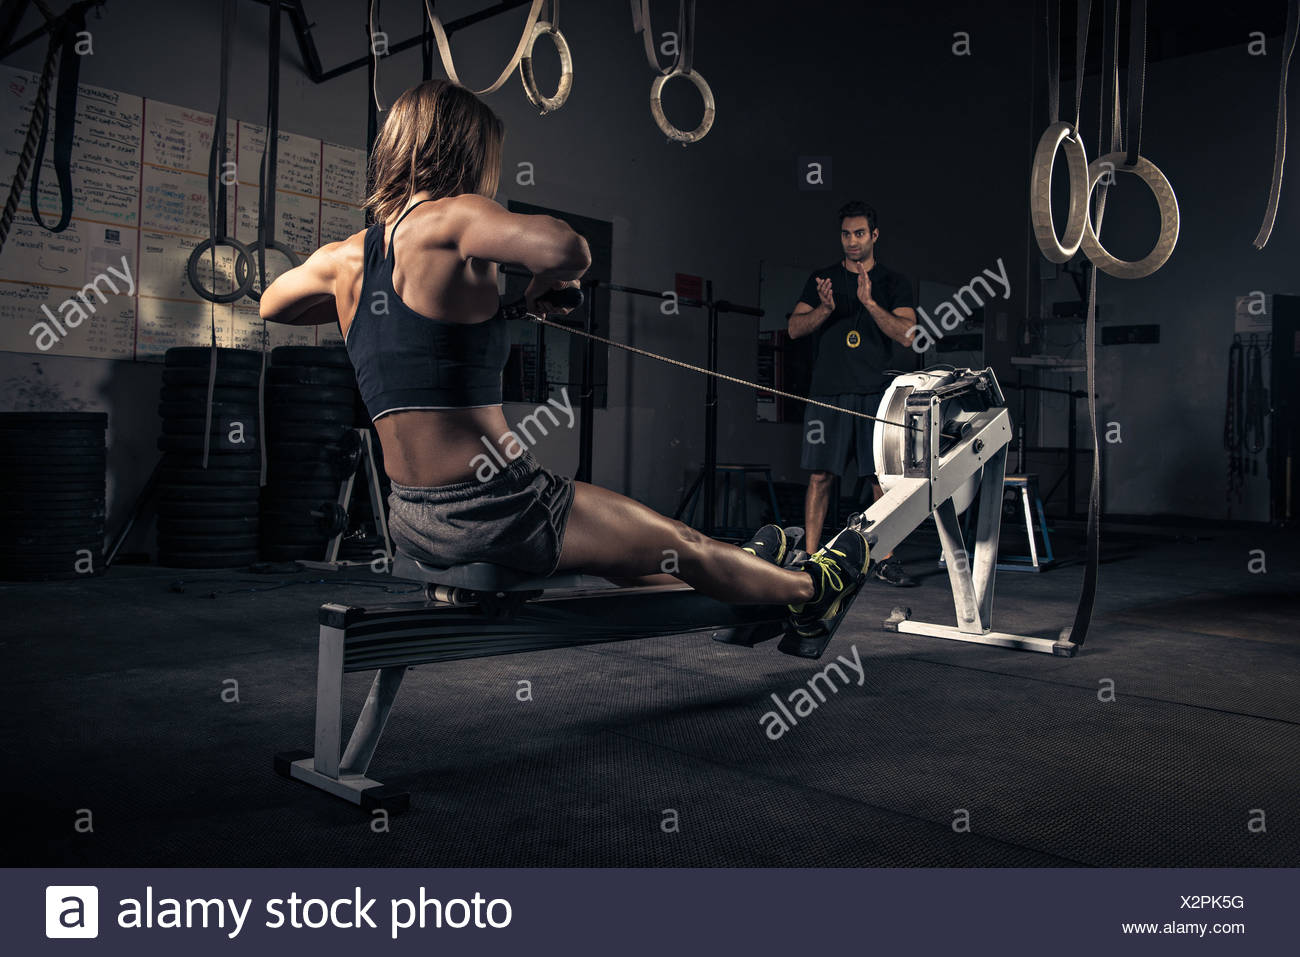 Woman Using Rowing Machine In High Resolution Stock Photography and ...